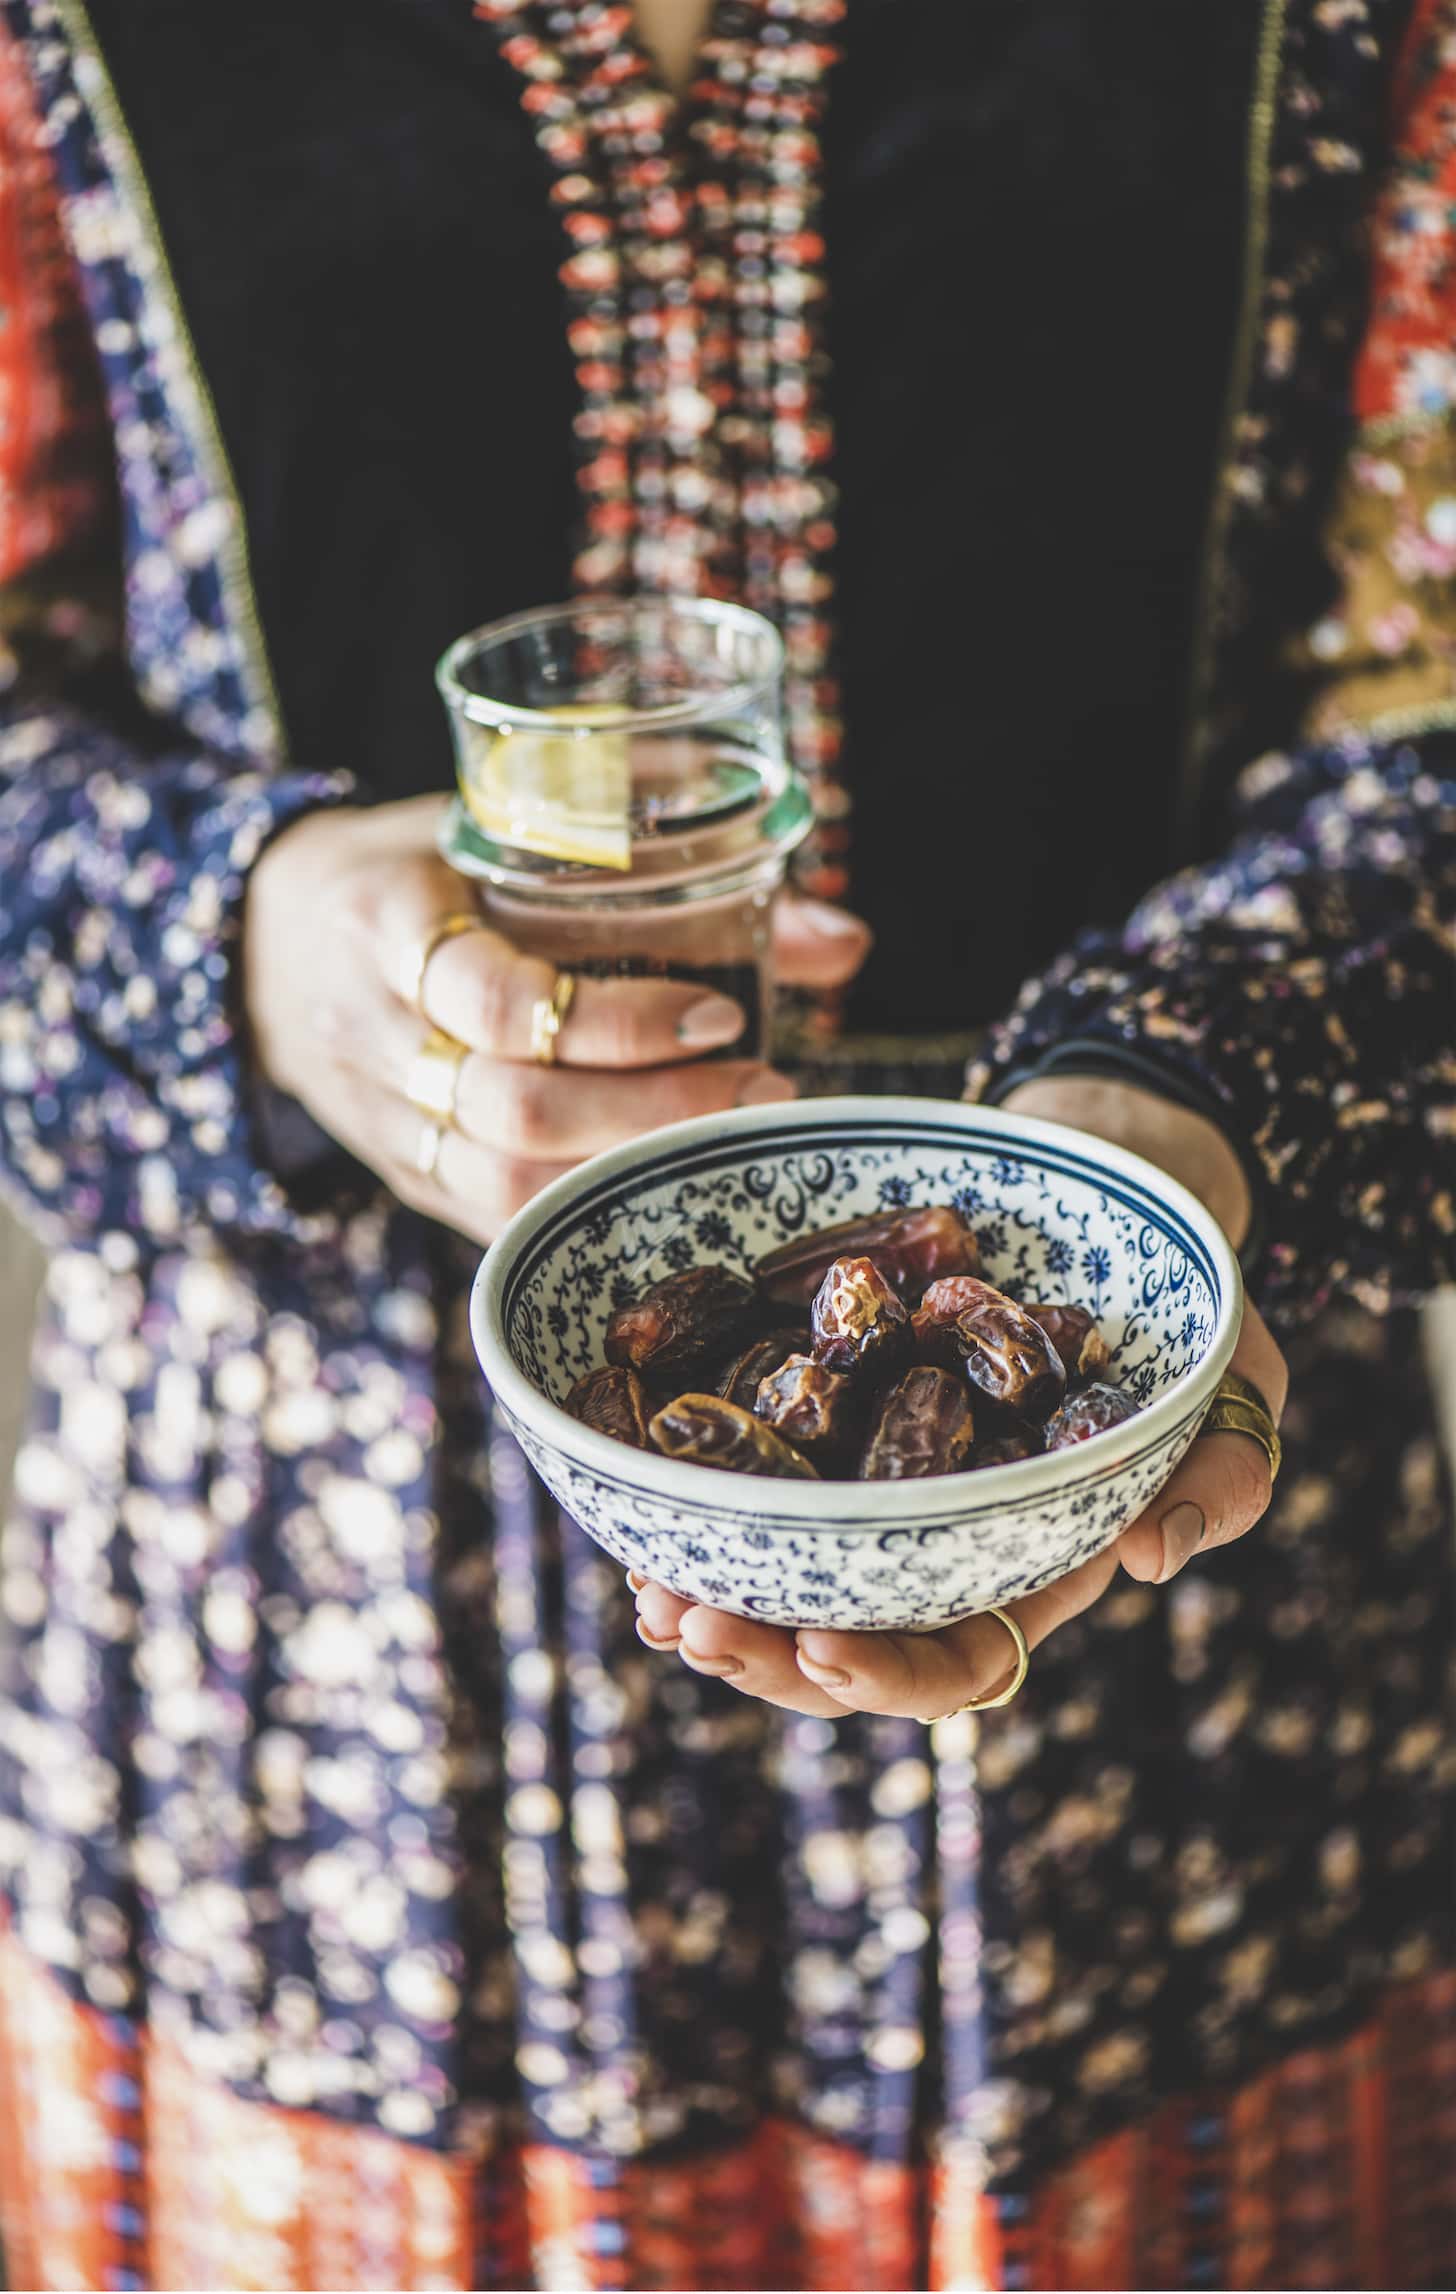 Woman in oriental dress holding bowl of dates and fresh drinking water in hands for Ramadan iftar evening meal and fasting month. Ramazan Muslim fasting food and islamic Middle East tradition